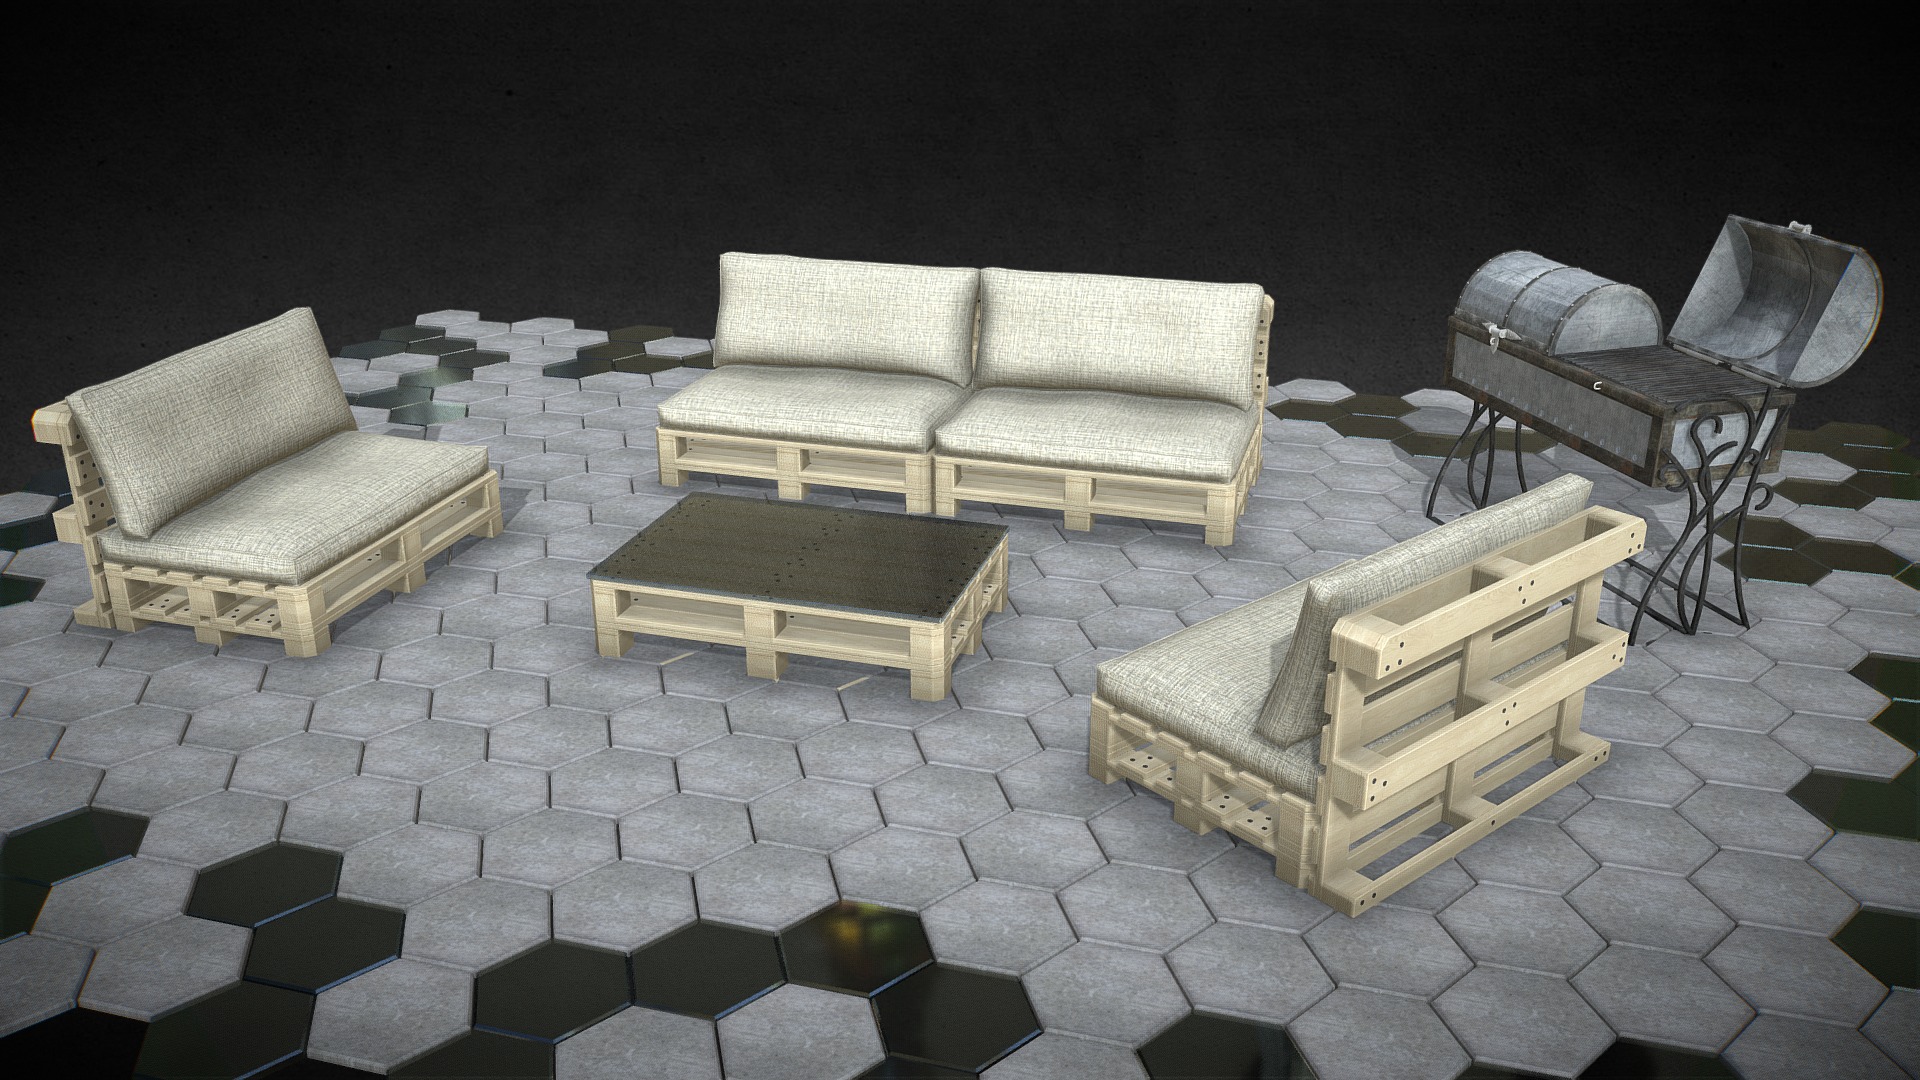 3D model outdoor furniture from pallets - This is a 3D model of the outdoor furniture from pallets. The 3D model is about a group of white couches.